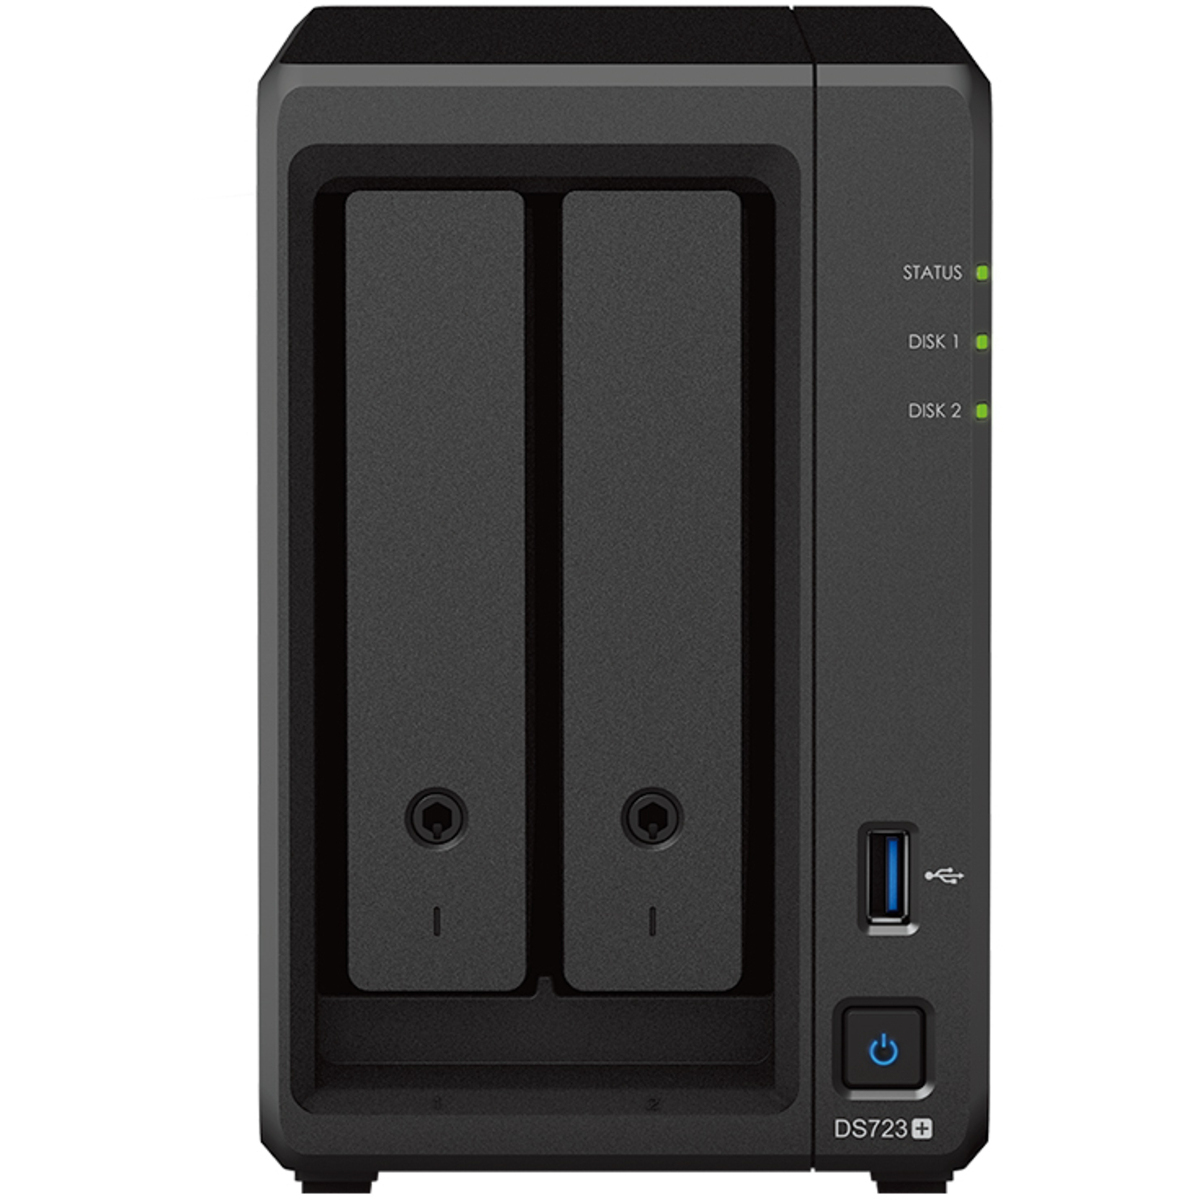 buy $1376 Synology DiskStation DS723+ 40tb Desktop NAS - Network Attached Storage Device 2x20000gb Western Digital Red Pro WD201KFGX 3.5 7200rpm SATA 6Gb/s HDD NAS Class Drives Installed - Burn-In Tested - nas headquarters buy network attached storage server device das new raid-5 free shipping usa DiskStation DS723+